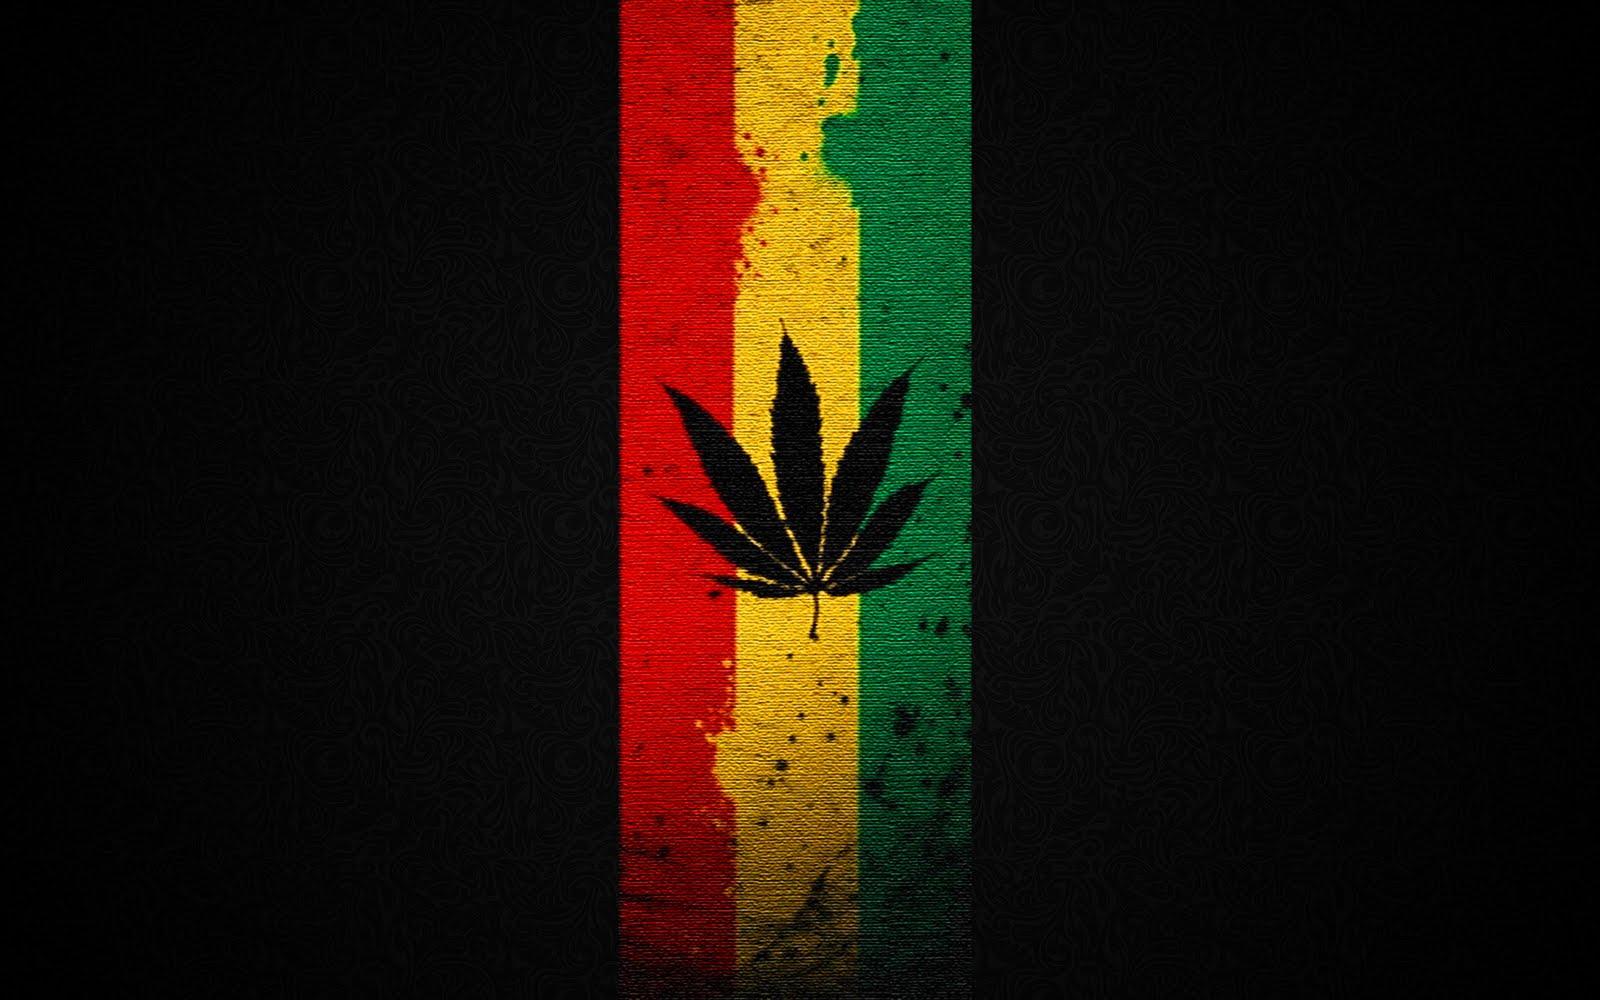 EBW91: Jamaica Flag Wallpaper in Best Resolutions, HD Quality